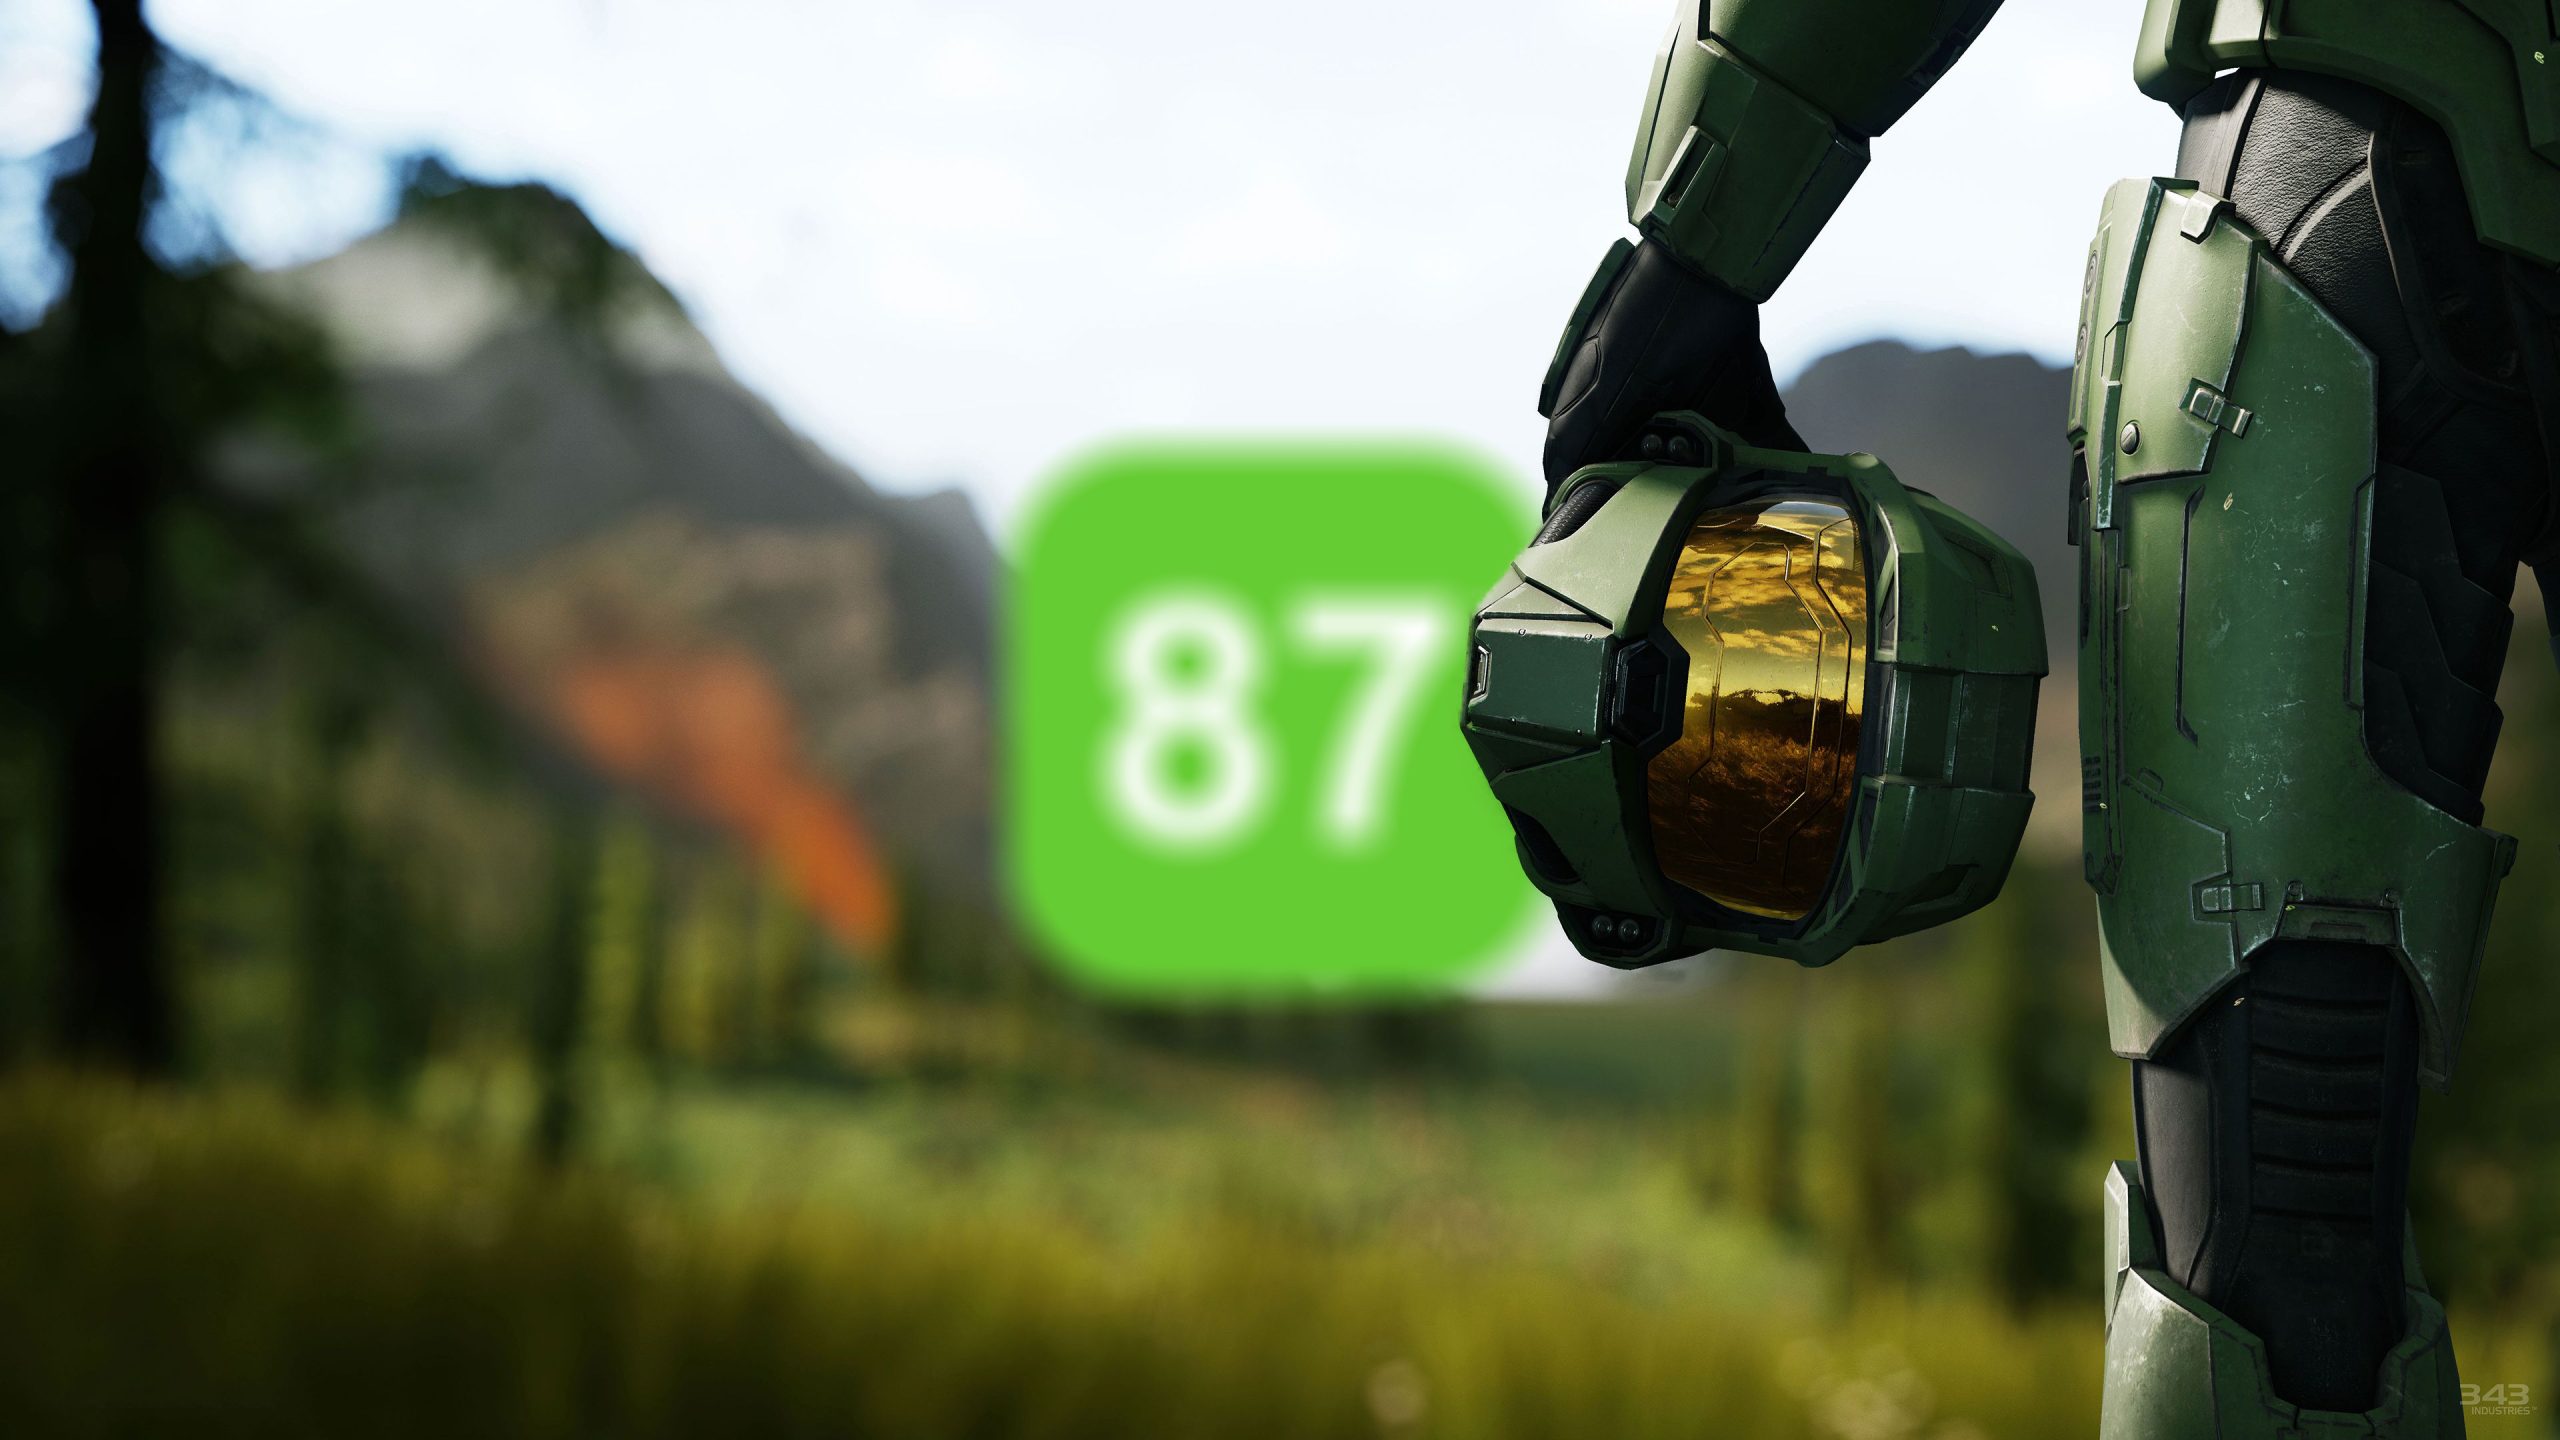 Halo Infinite is the highest rated game in the franchise post-Bungie